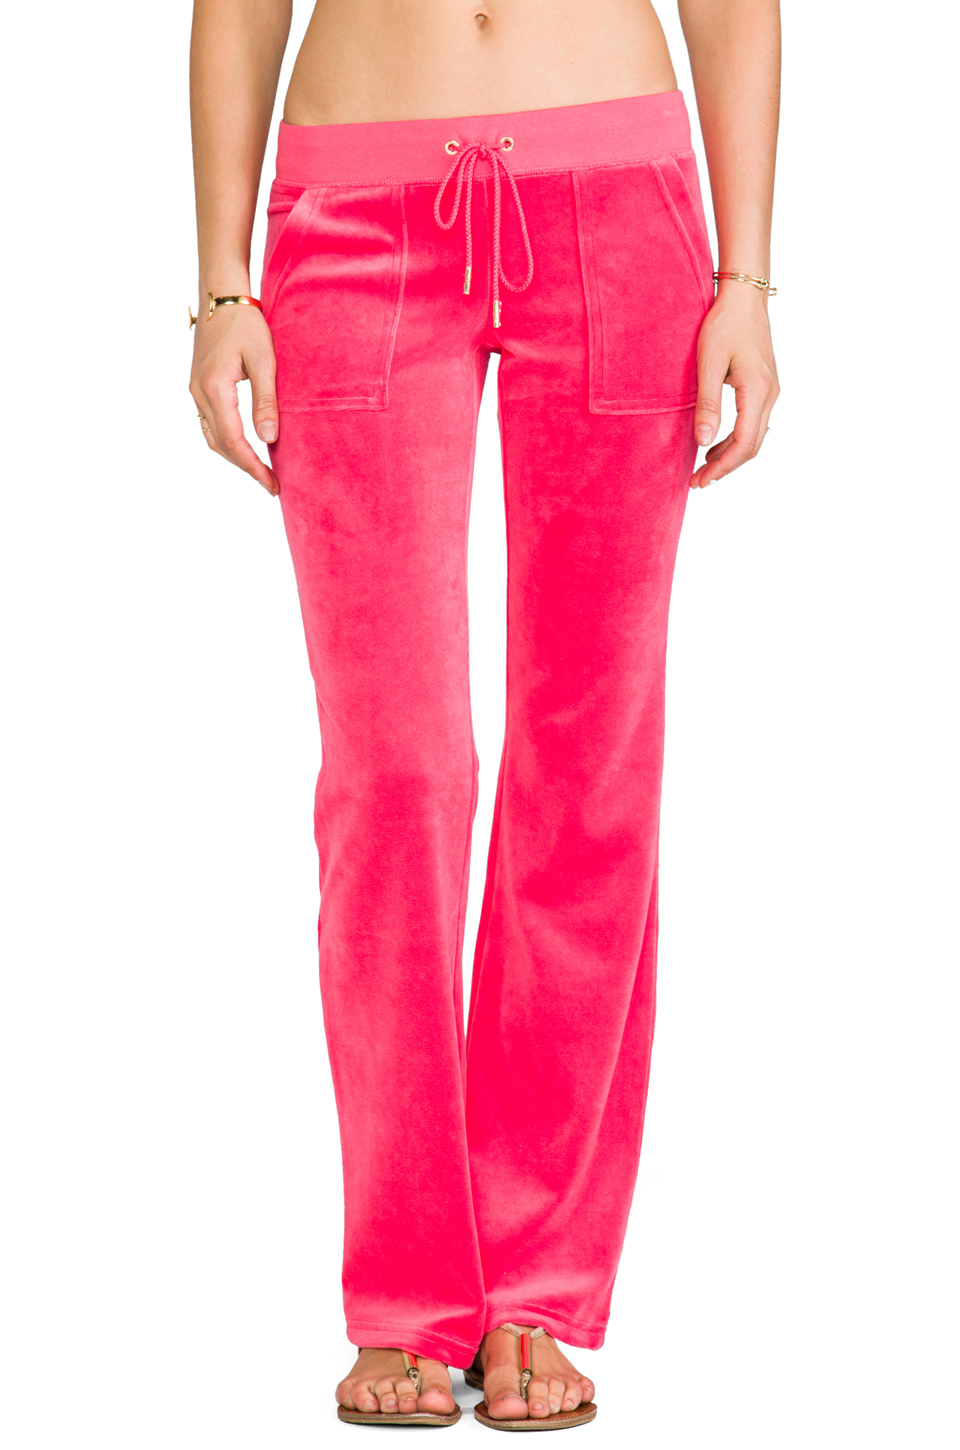 Juicy Couture J Bling Velour Bootcut Pant in Coral in Pink - Lyst